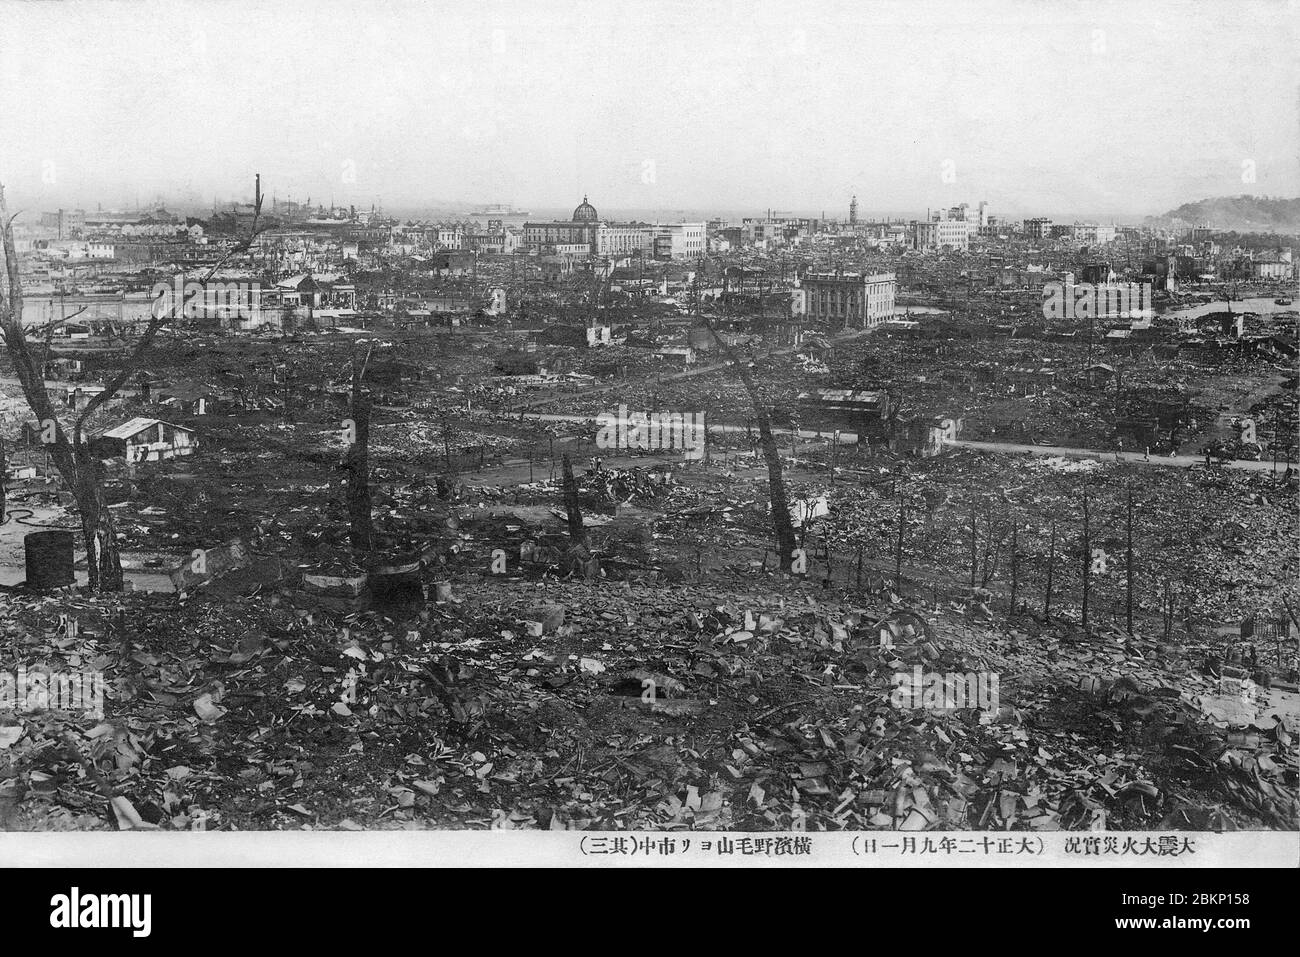 [ 1920s Japan - Yokohama Destroyed by the Great Kanto Earthquake ] —   The ruins of Yokohama after the Great Kanto Earthquake of September 1, 1923 (Taisho 12). The photographer took this sobering photo from  Noge-Yama.  The quake, with an estimated magnitude between 7.9 and 8.4 on the Richter scale, devastated Tokyo, the port city of Yokohama, surrounding prefectures of Chiba, Kanagawa, and Shizuoka, and claimed over 140,000 victims.  Photo number 3 of 4.  20th century vintage postcard. Stock Photo